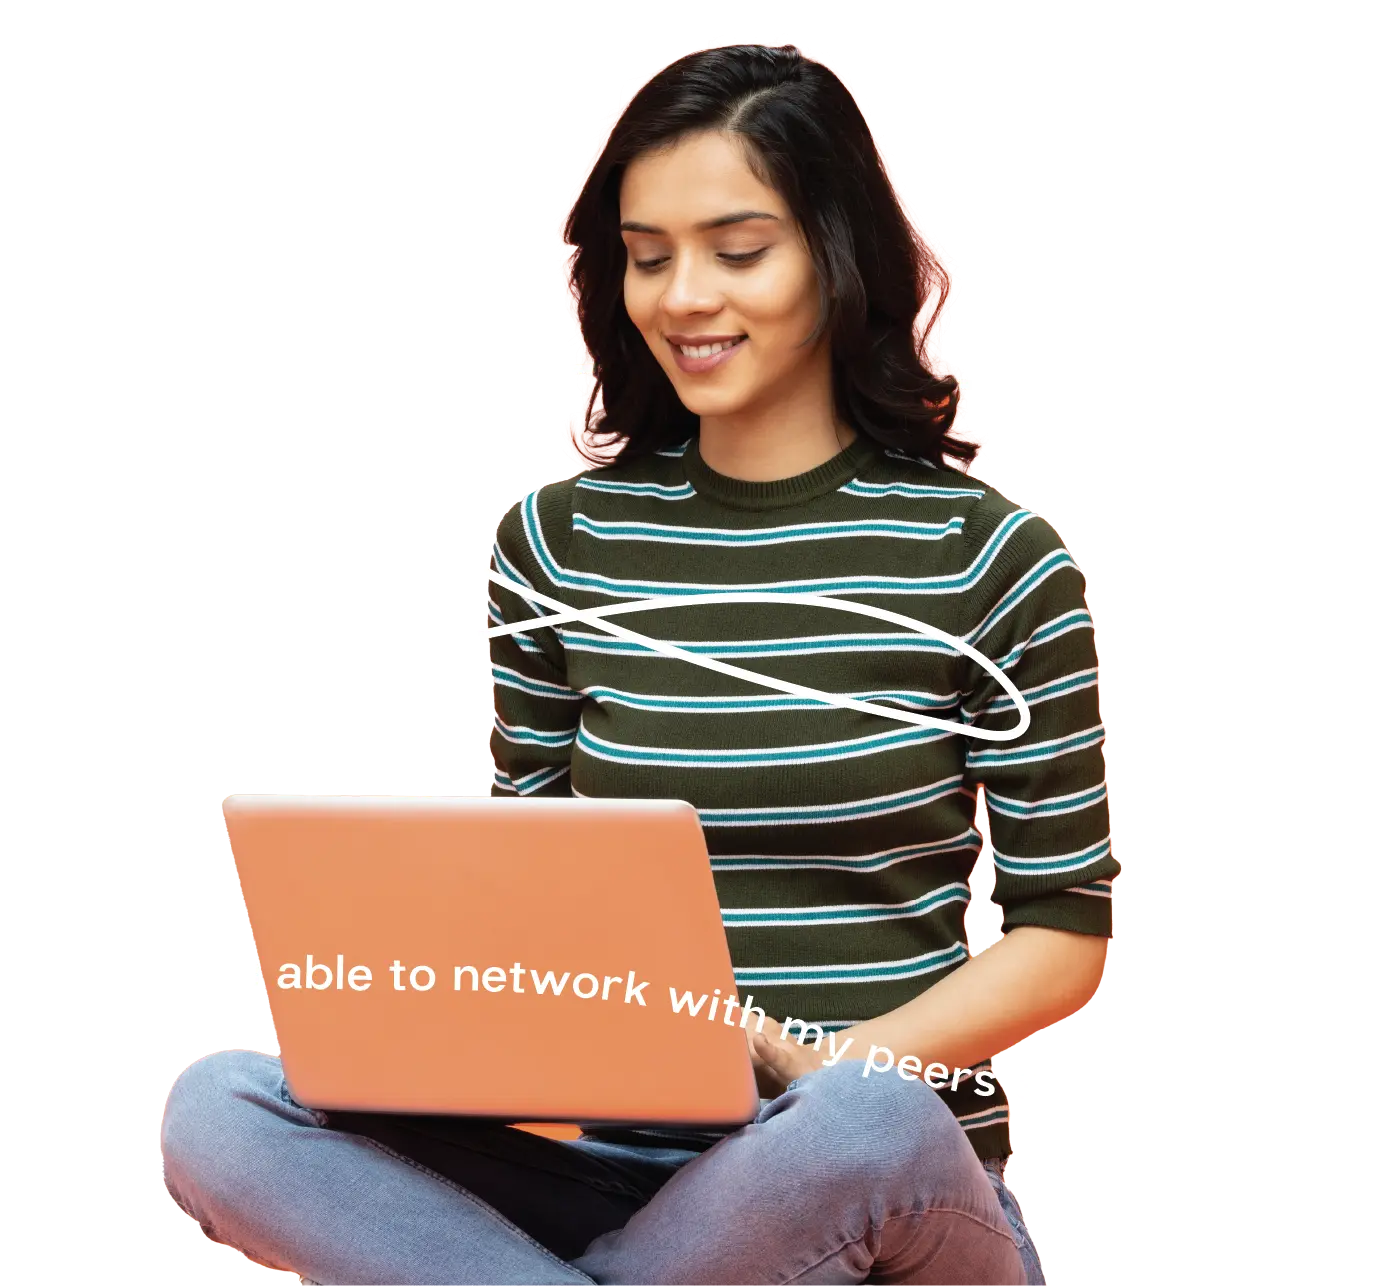 Young woman on her laptop with text saying 'I've been able to network with my peers around me'.